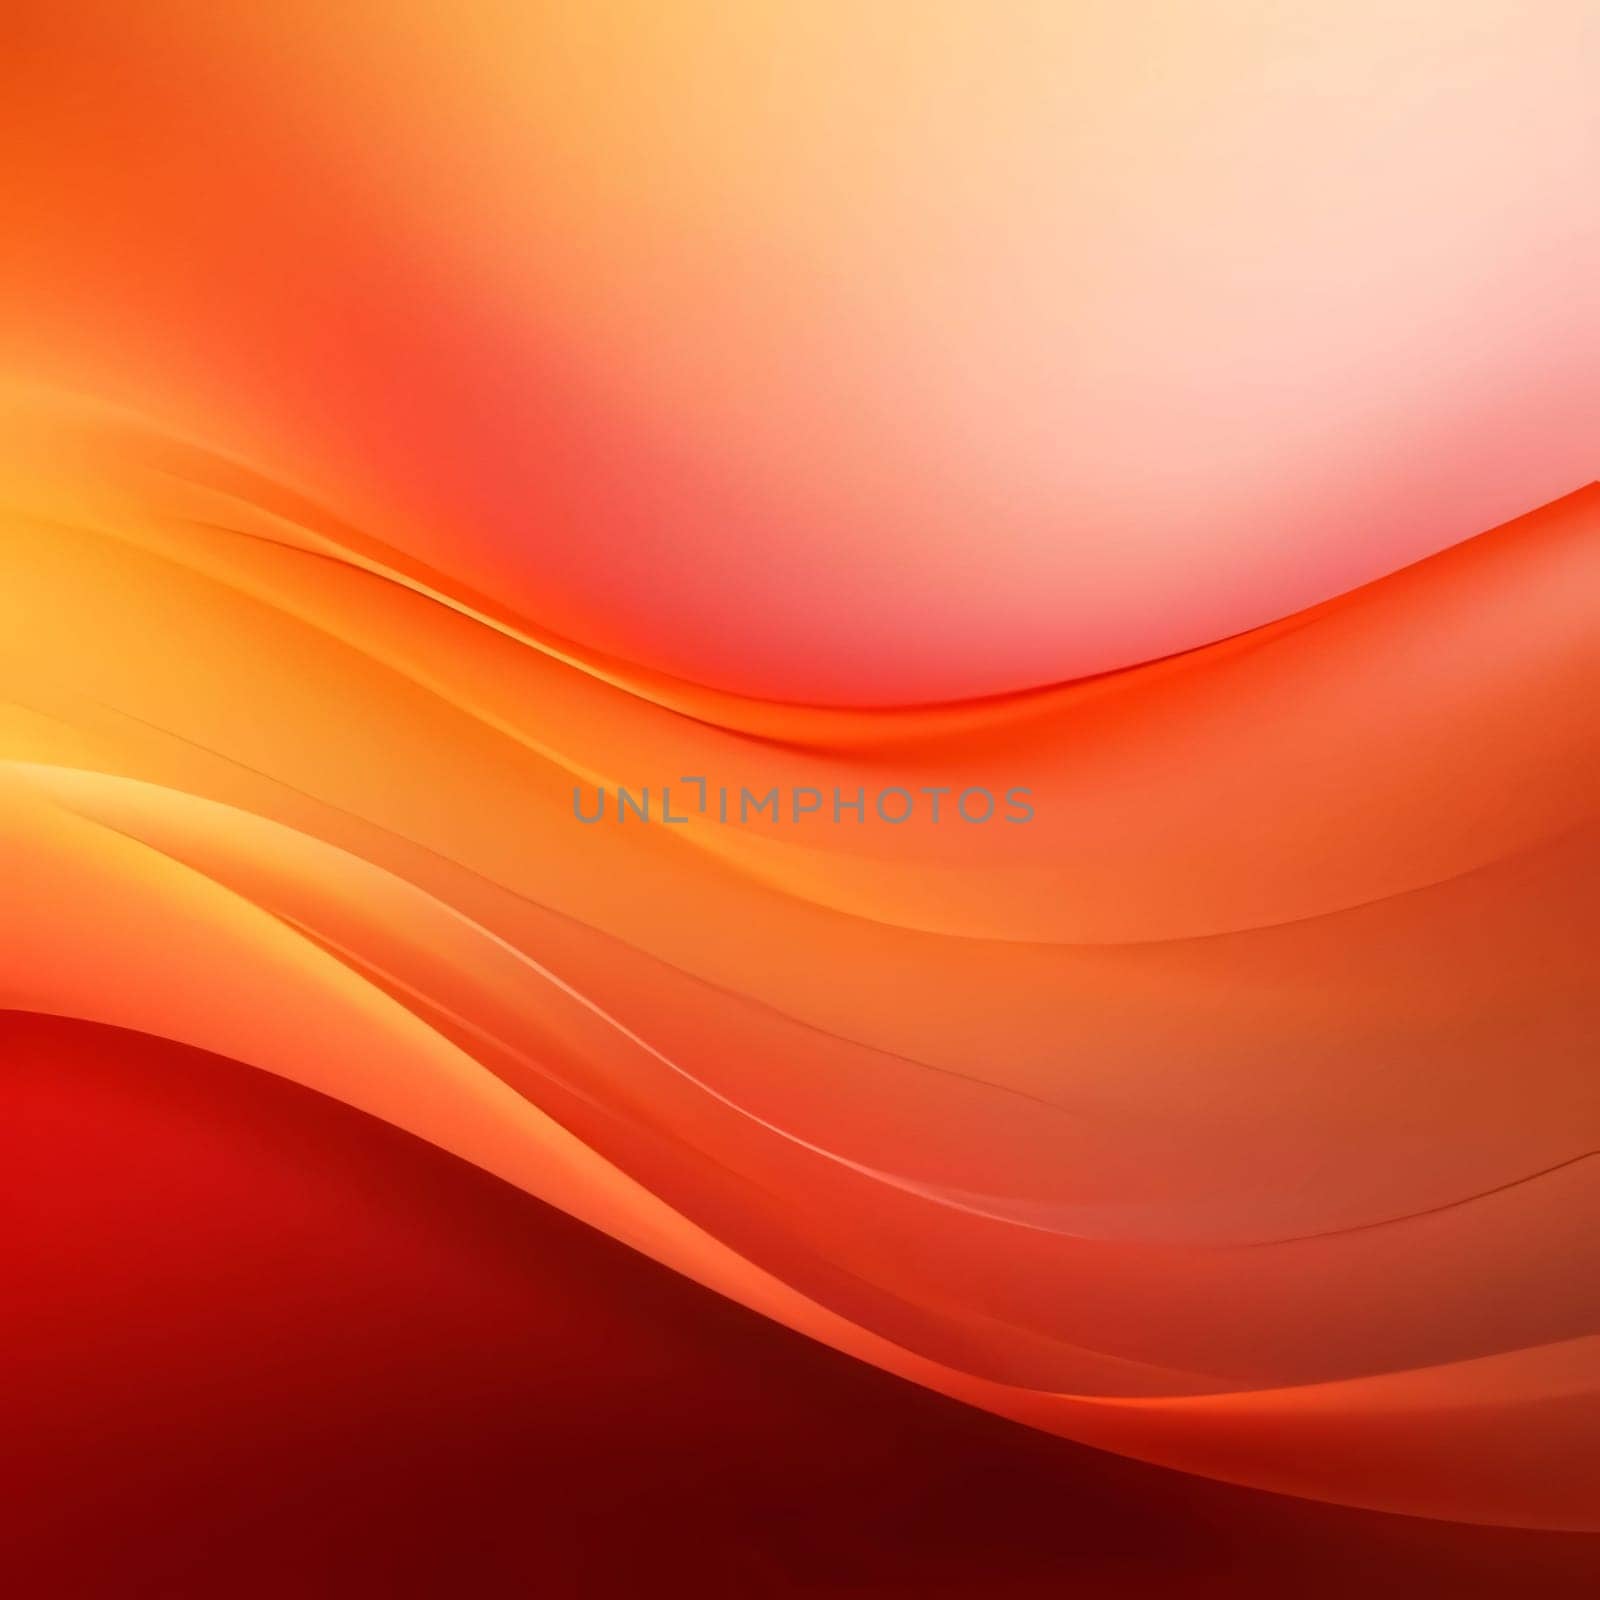 abstract background with smooth lines in orange and red colors, vector illustration by ThemesS